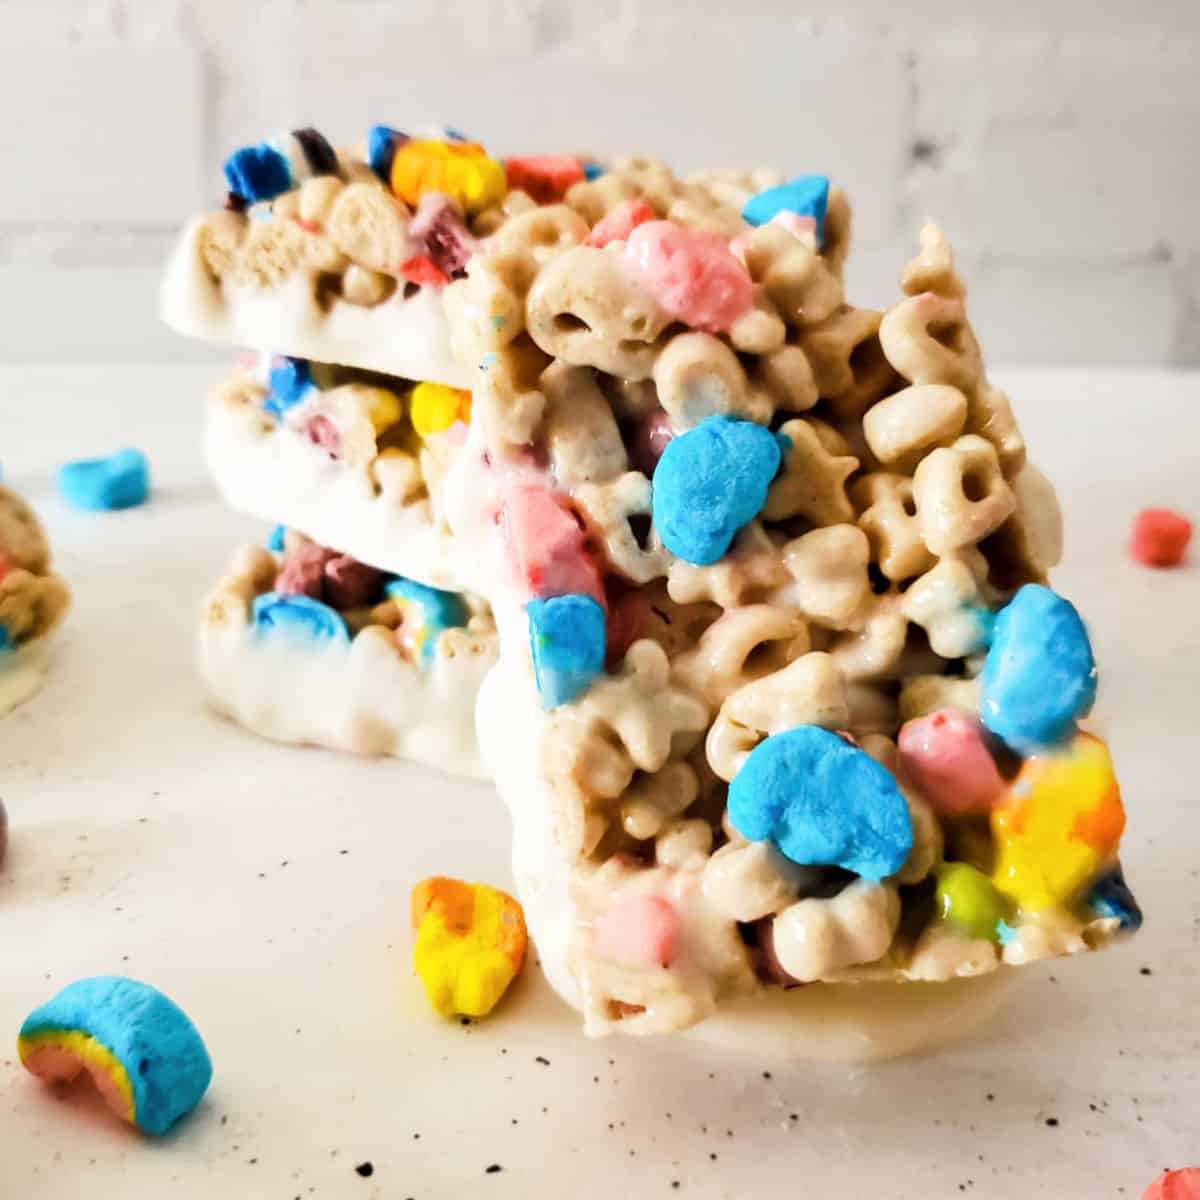 Rice krispie bars made with Lucky Charms cereal.